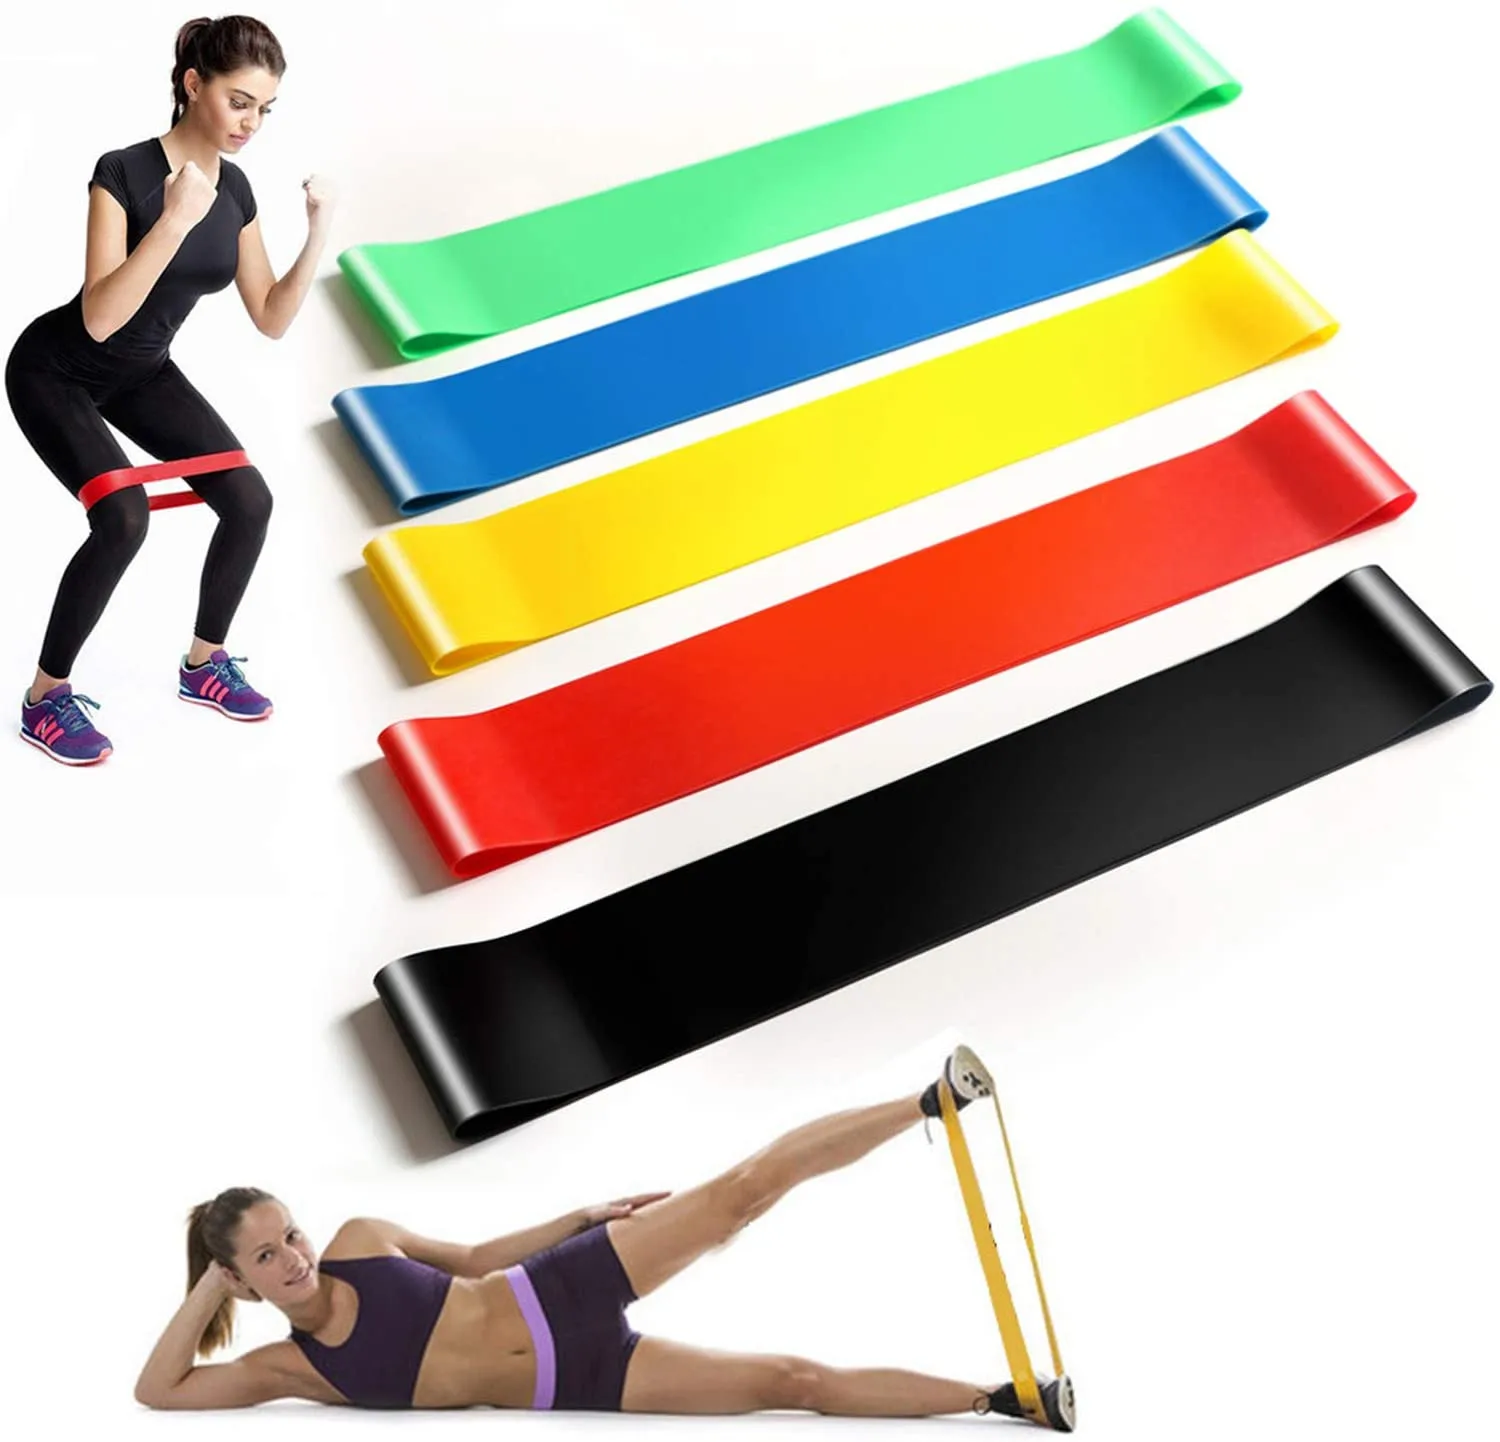 

5 different levels custom printed booty Exercise bands TPE yoga stretch resistance bands, Black, blue, green,red, yellow